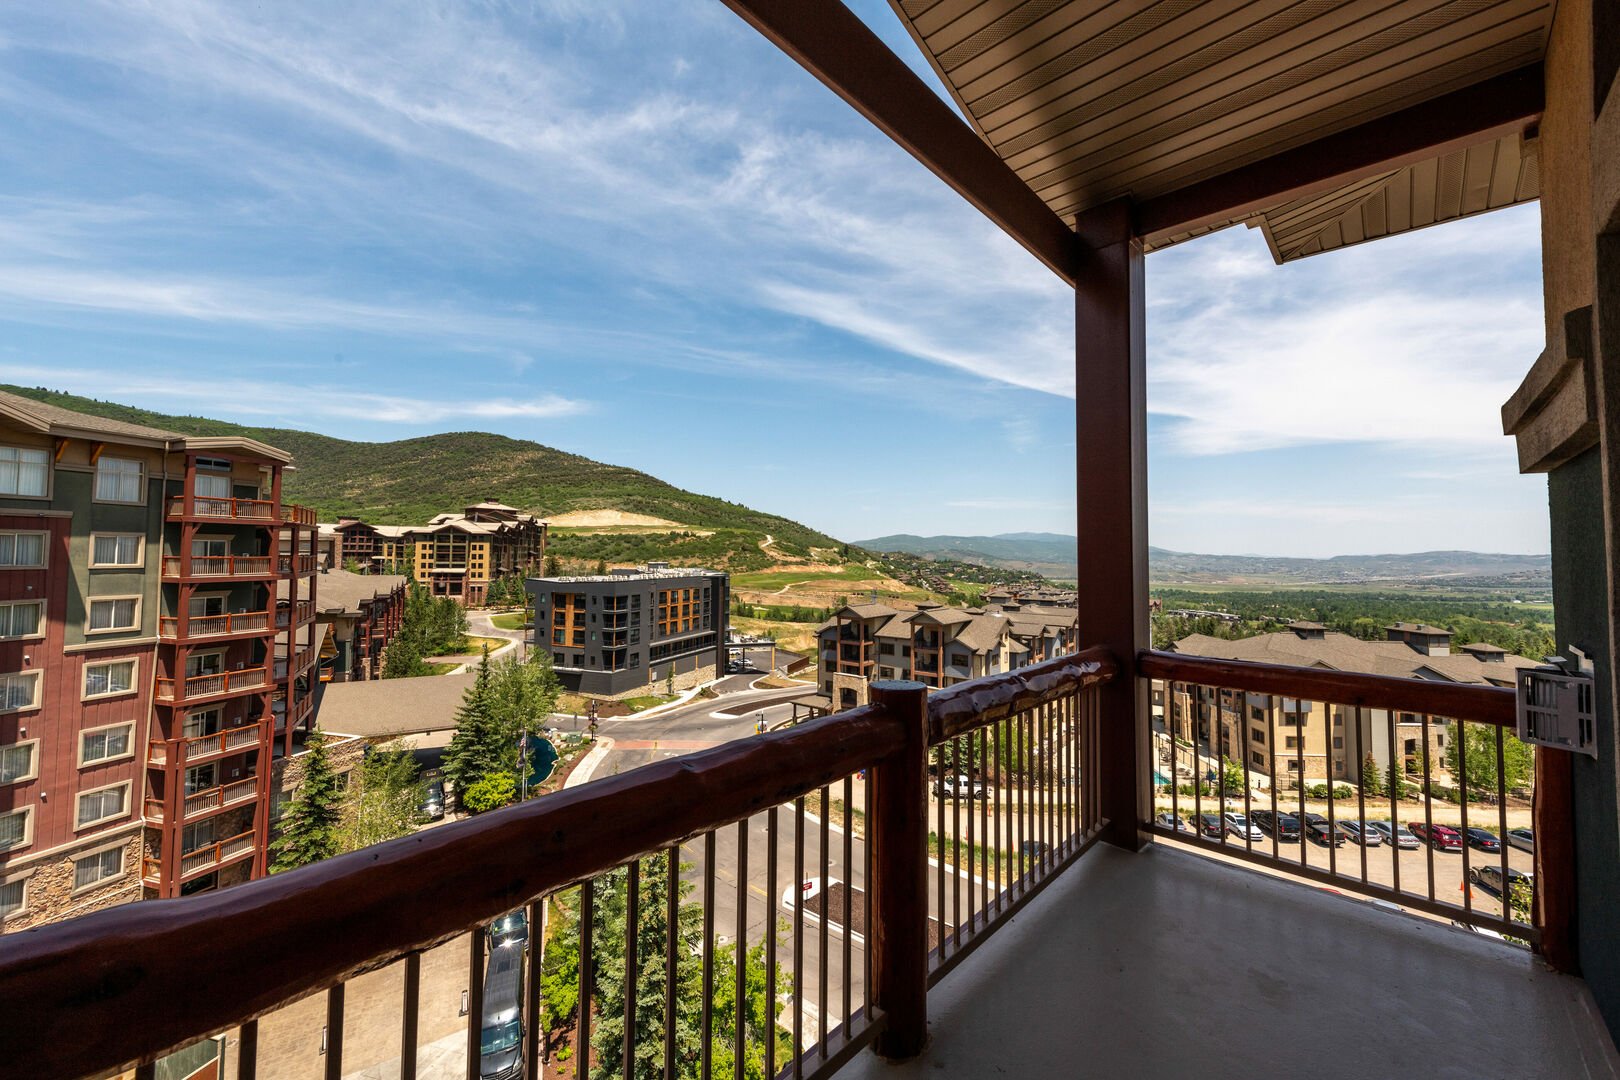 Summer mountain views from the balcony.